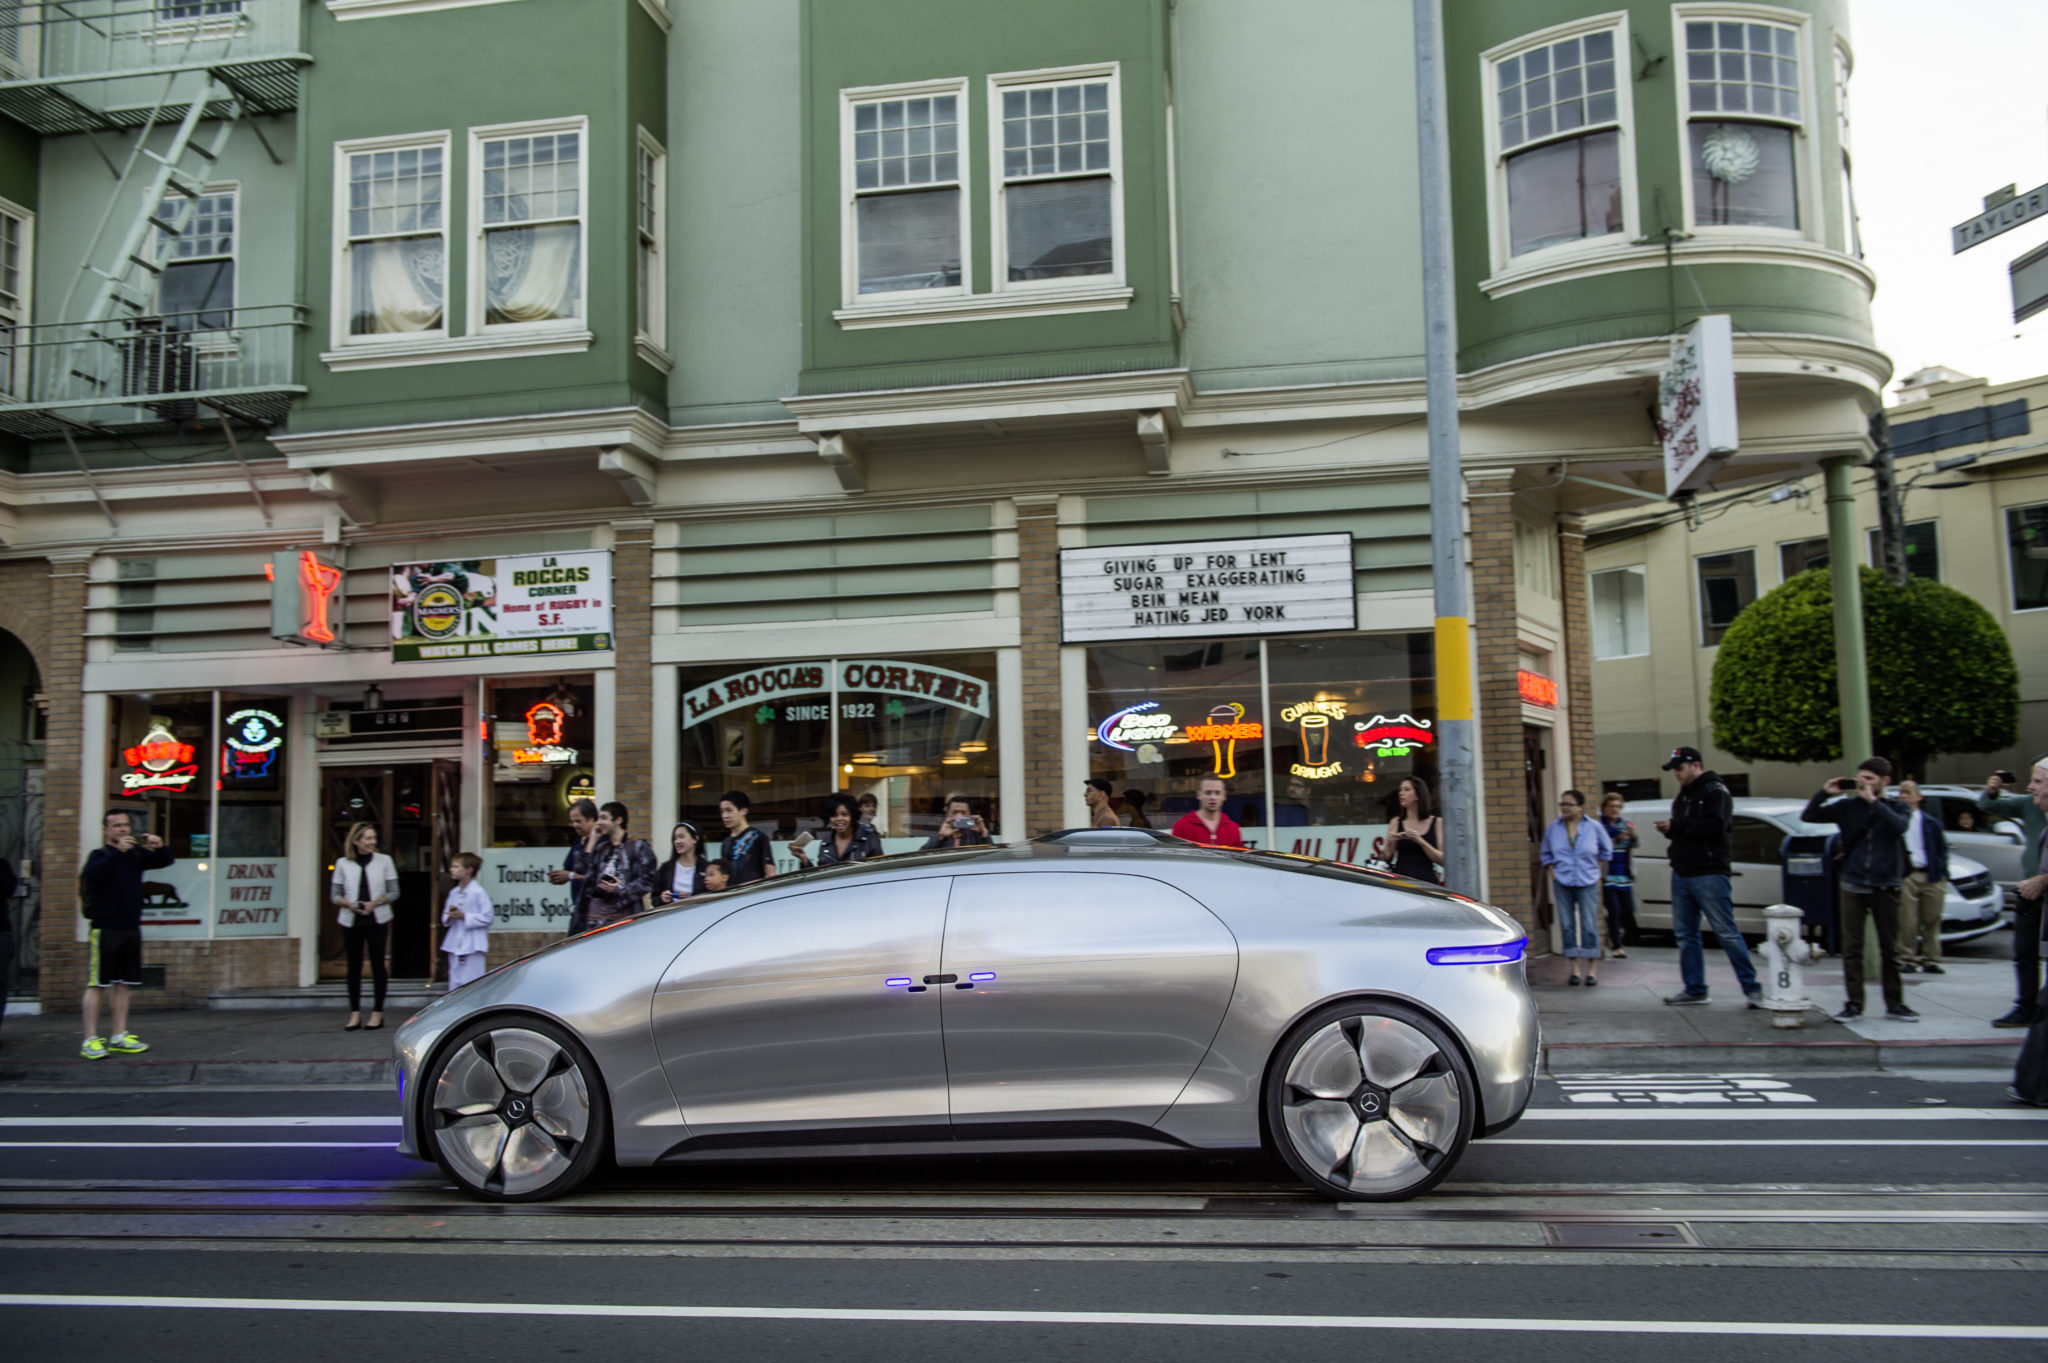 Mercedes-Benz F 015 Luxury in Motion in in San Francisco Die Vision: Mehr Lebensqualität für alle Stadtbewohner The vision: greater quality of life for all city dwellers